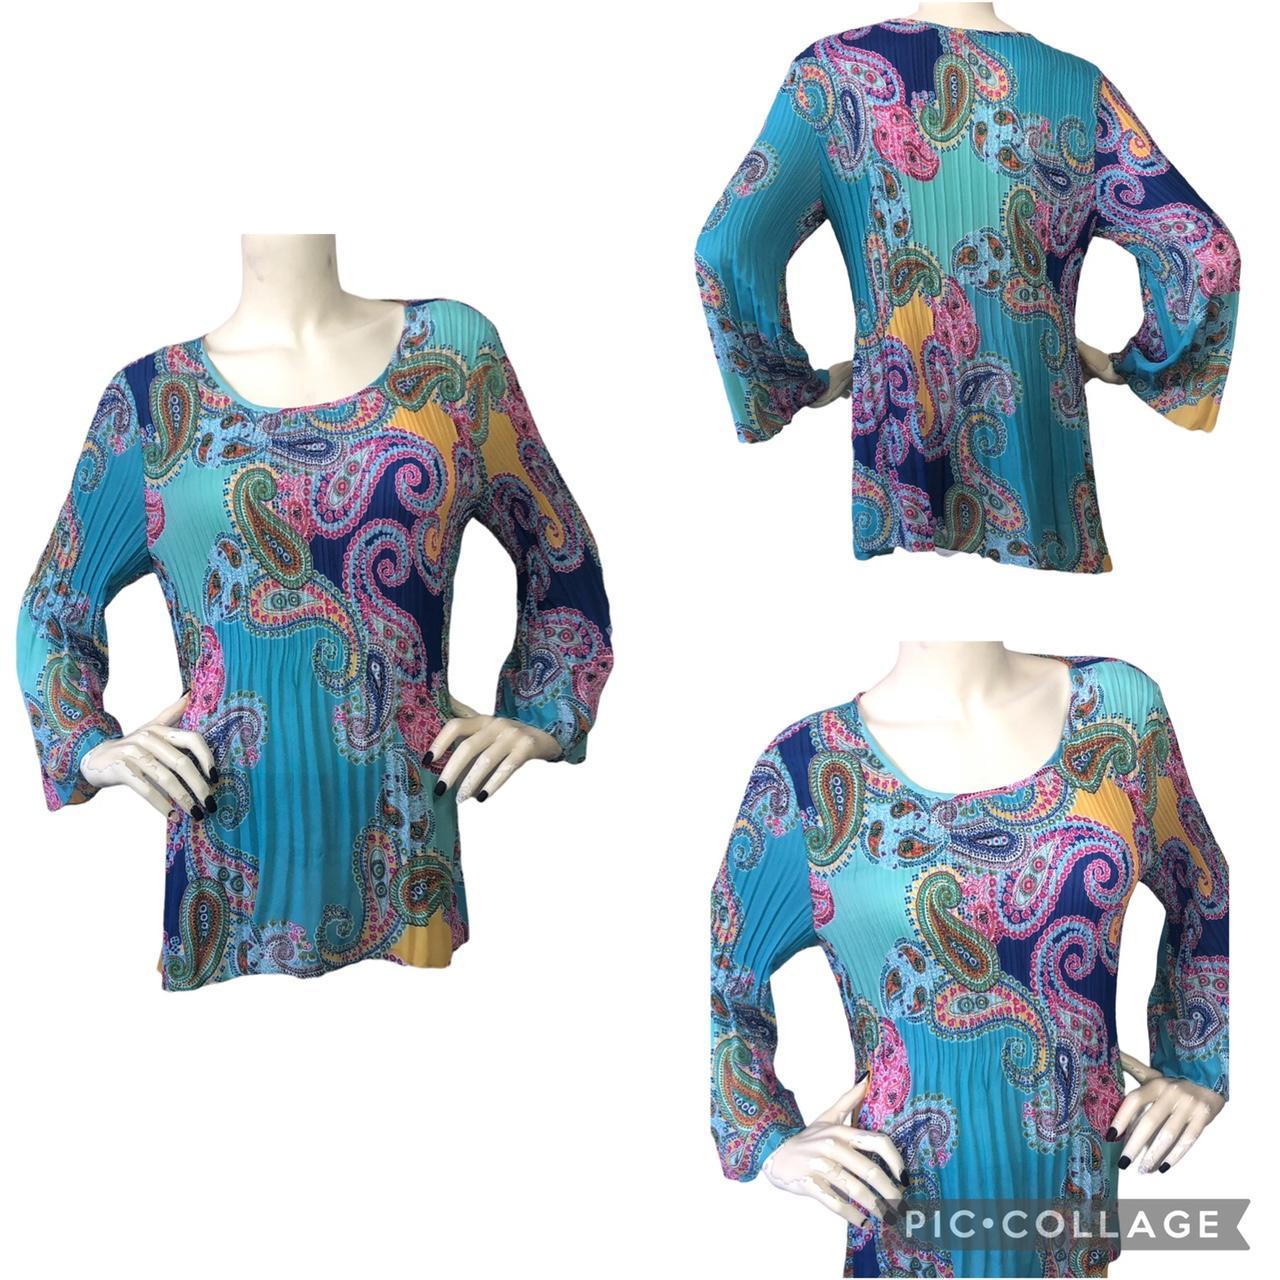 Product Image 3 - Pretty Paisley Print Tunic Top

Ribbed